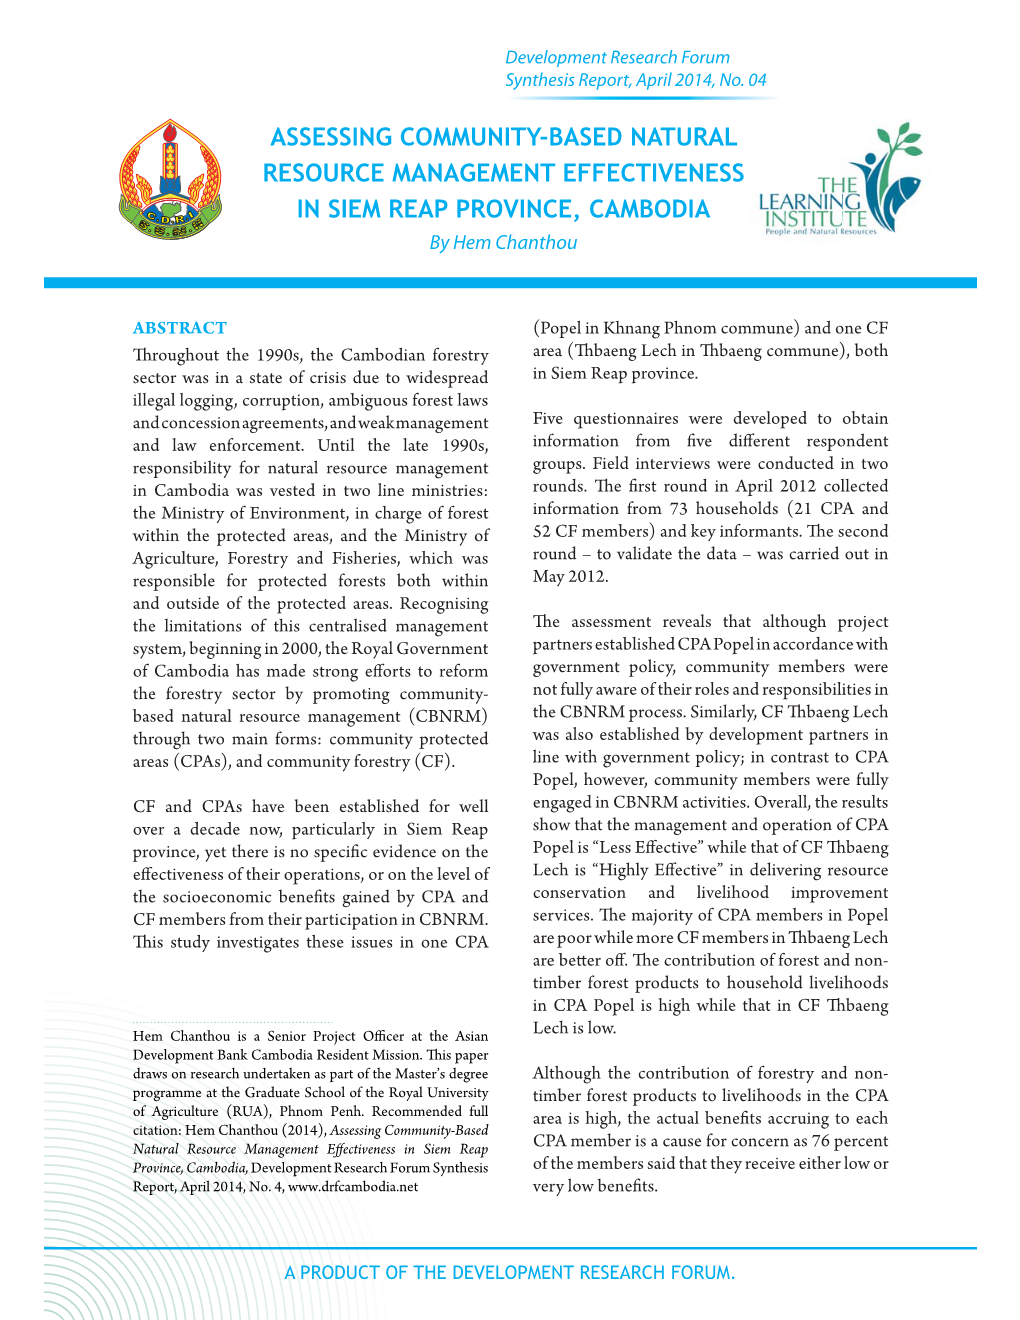 ASSESSING COMMUNITY-BASED NATURAL RESOURCE MANAGEMENT EFFECTIVENESS in SIEM REAP PROVINCE, CAMBODIA by Hem Chanthou